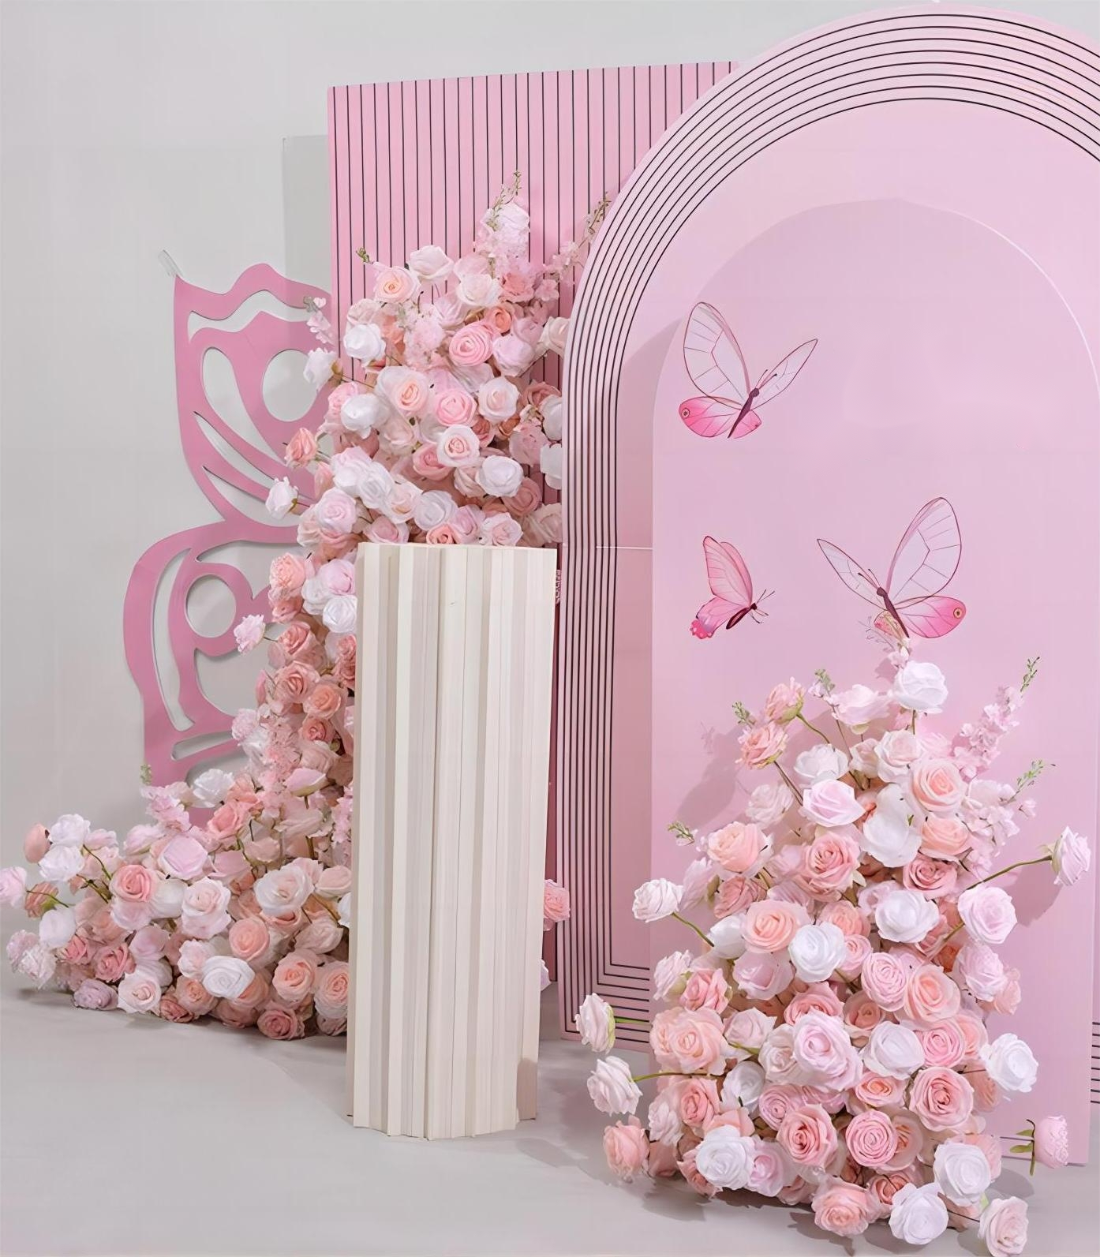 White Pink Artificial Flower Rose Wedding Party Birthday Backdrop Decor CH9315